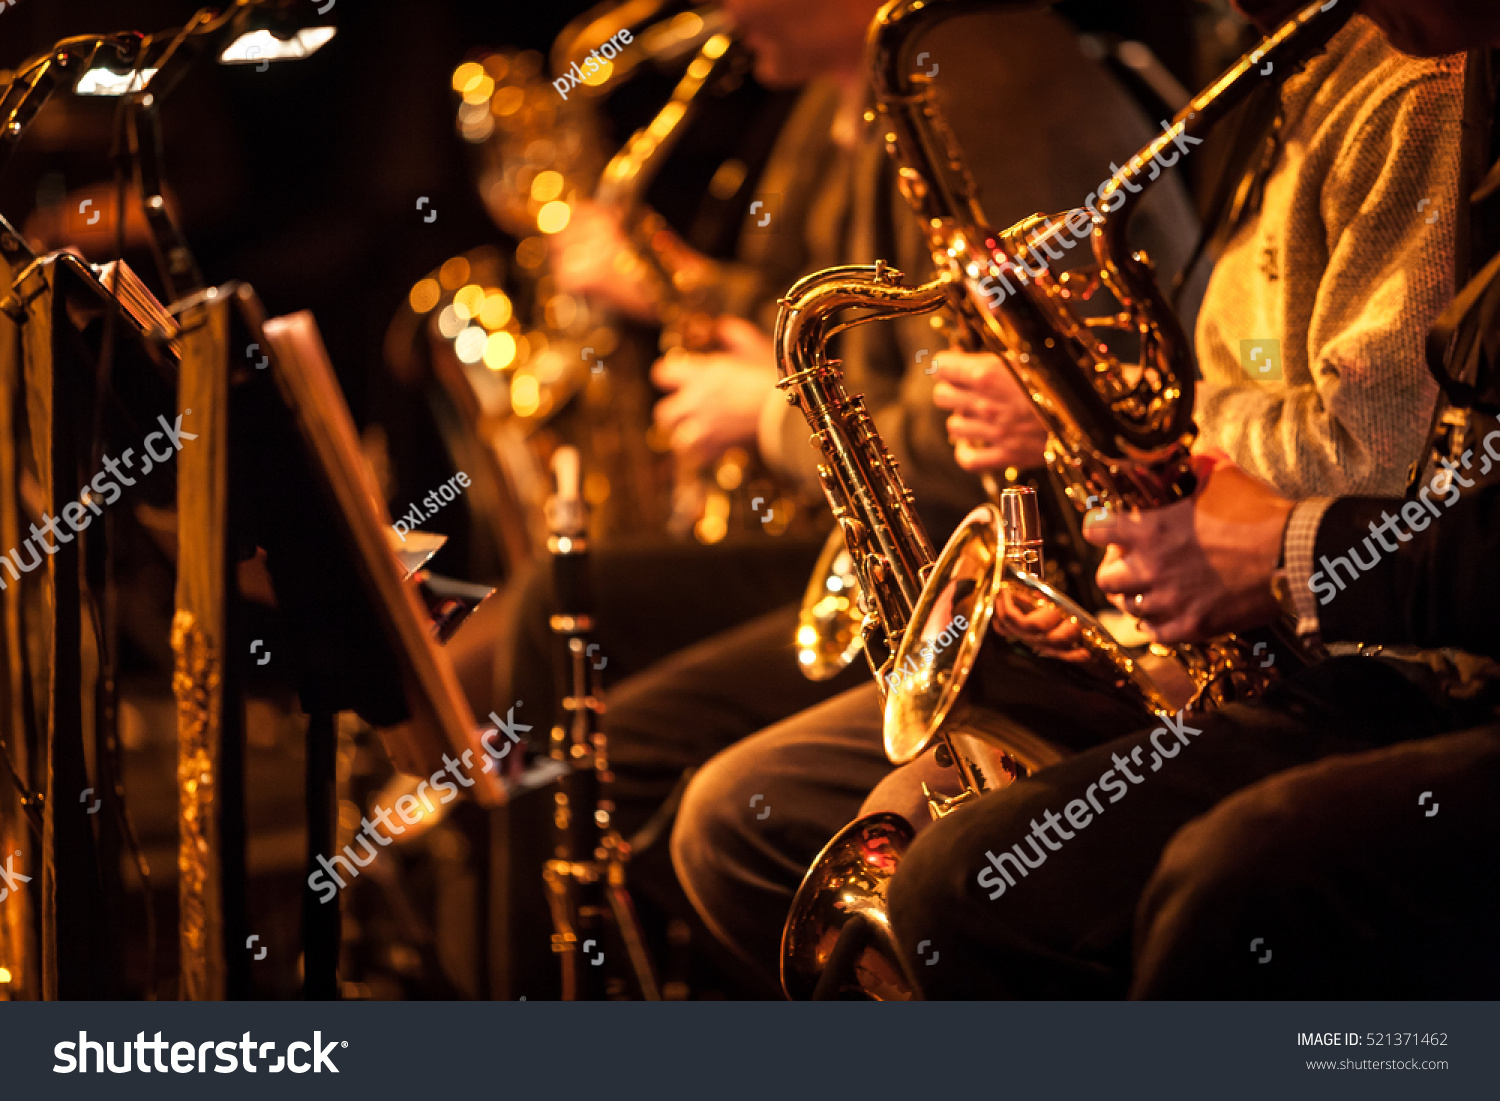 Big Band saxophone section. A candid view along the saxophone section of a big band in concert.
 #521371462